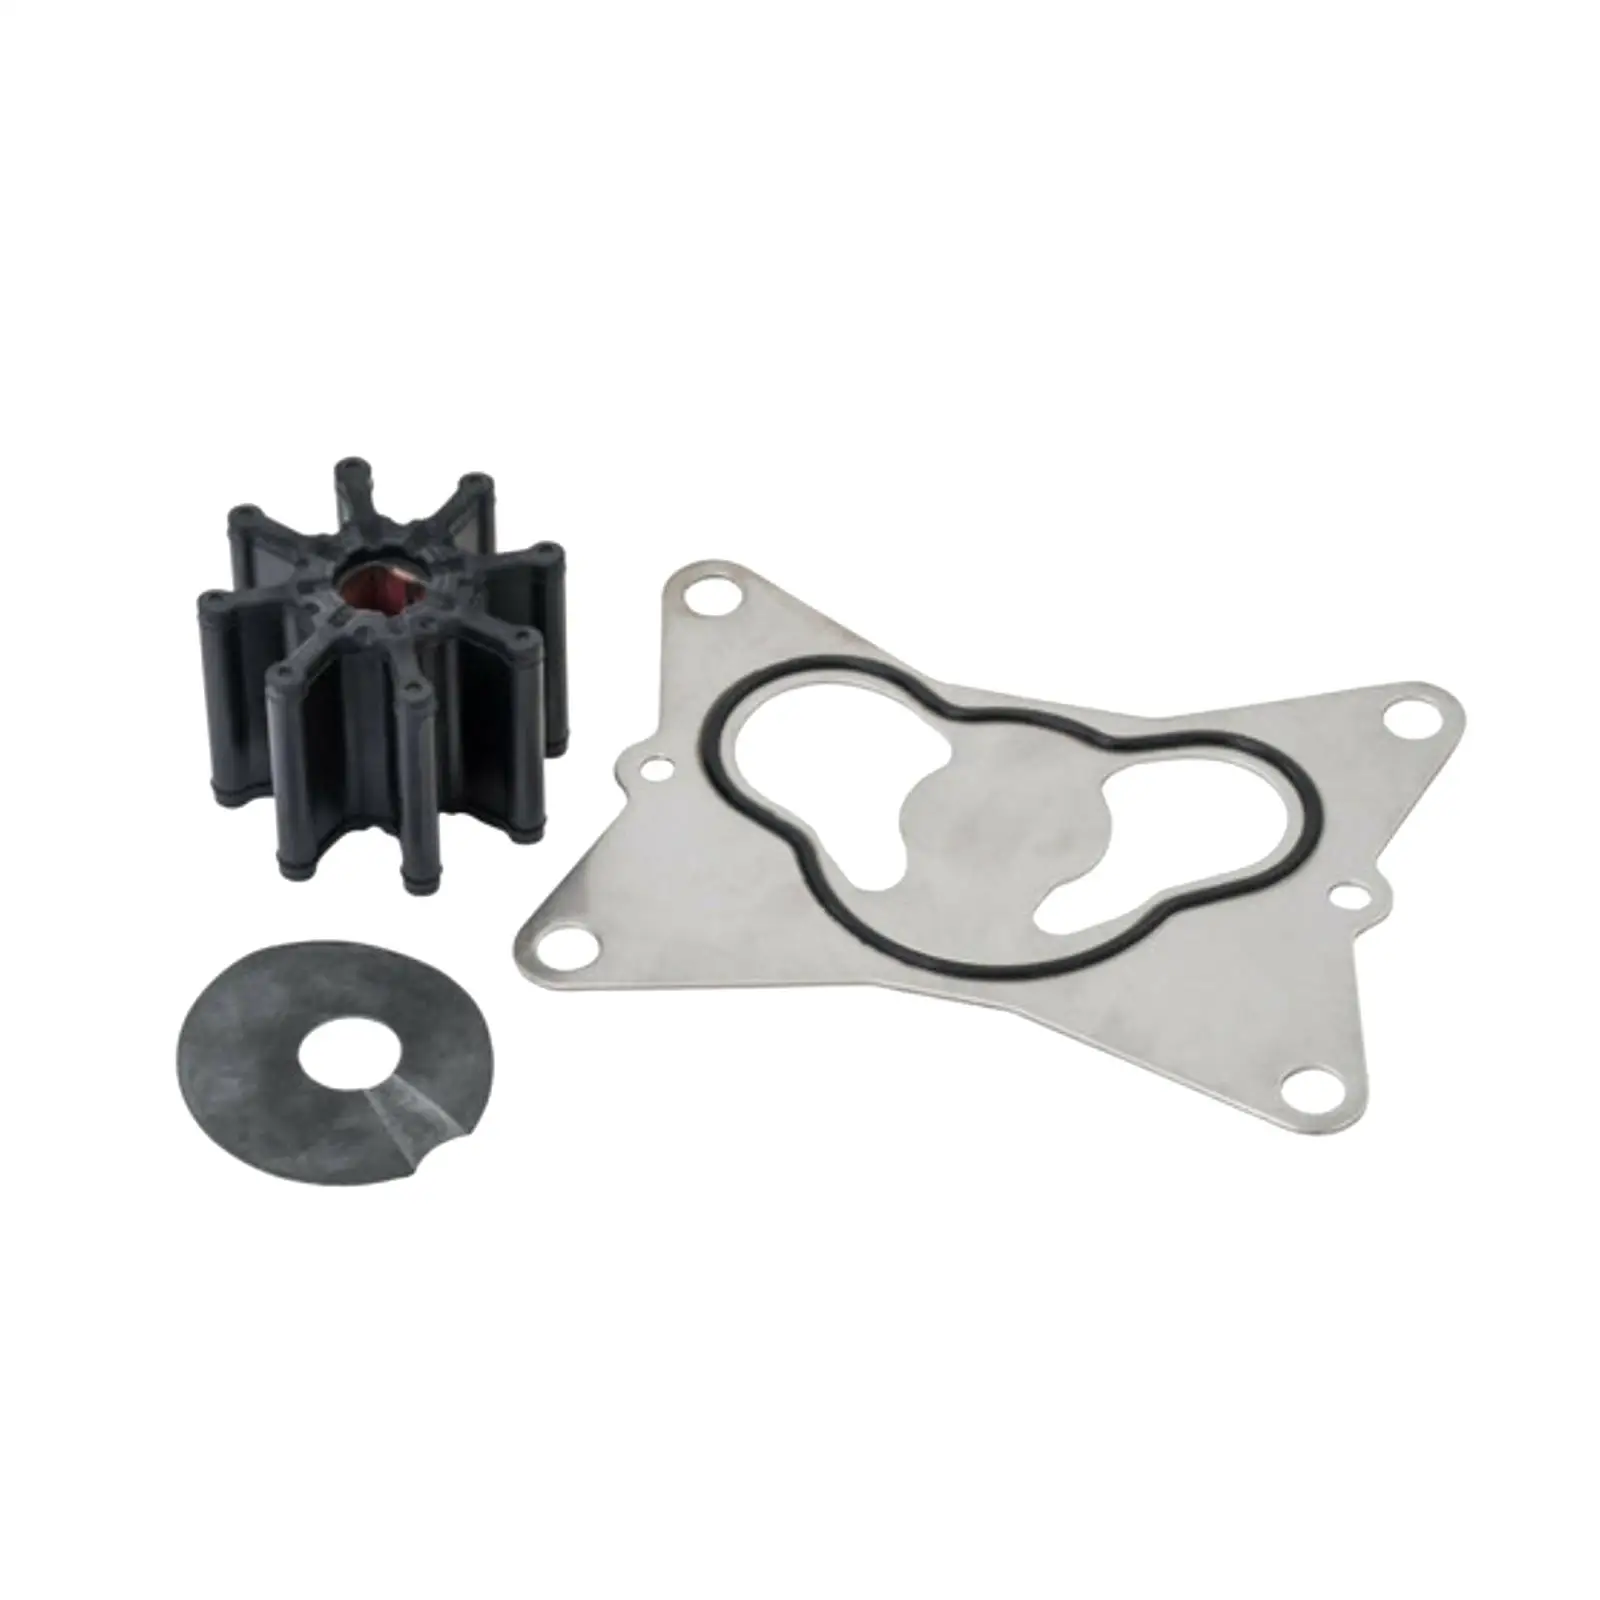 Water Pump Impeller Repair Kits Marine Boat Engines Impeller Service Kits Replace for 47-8M0137221 for Mercruiser